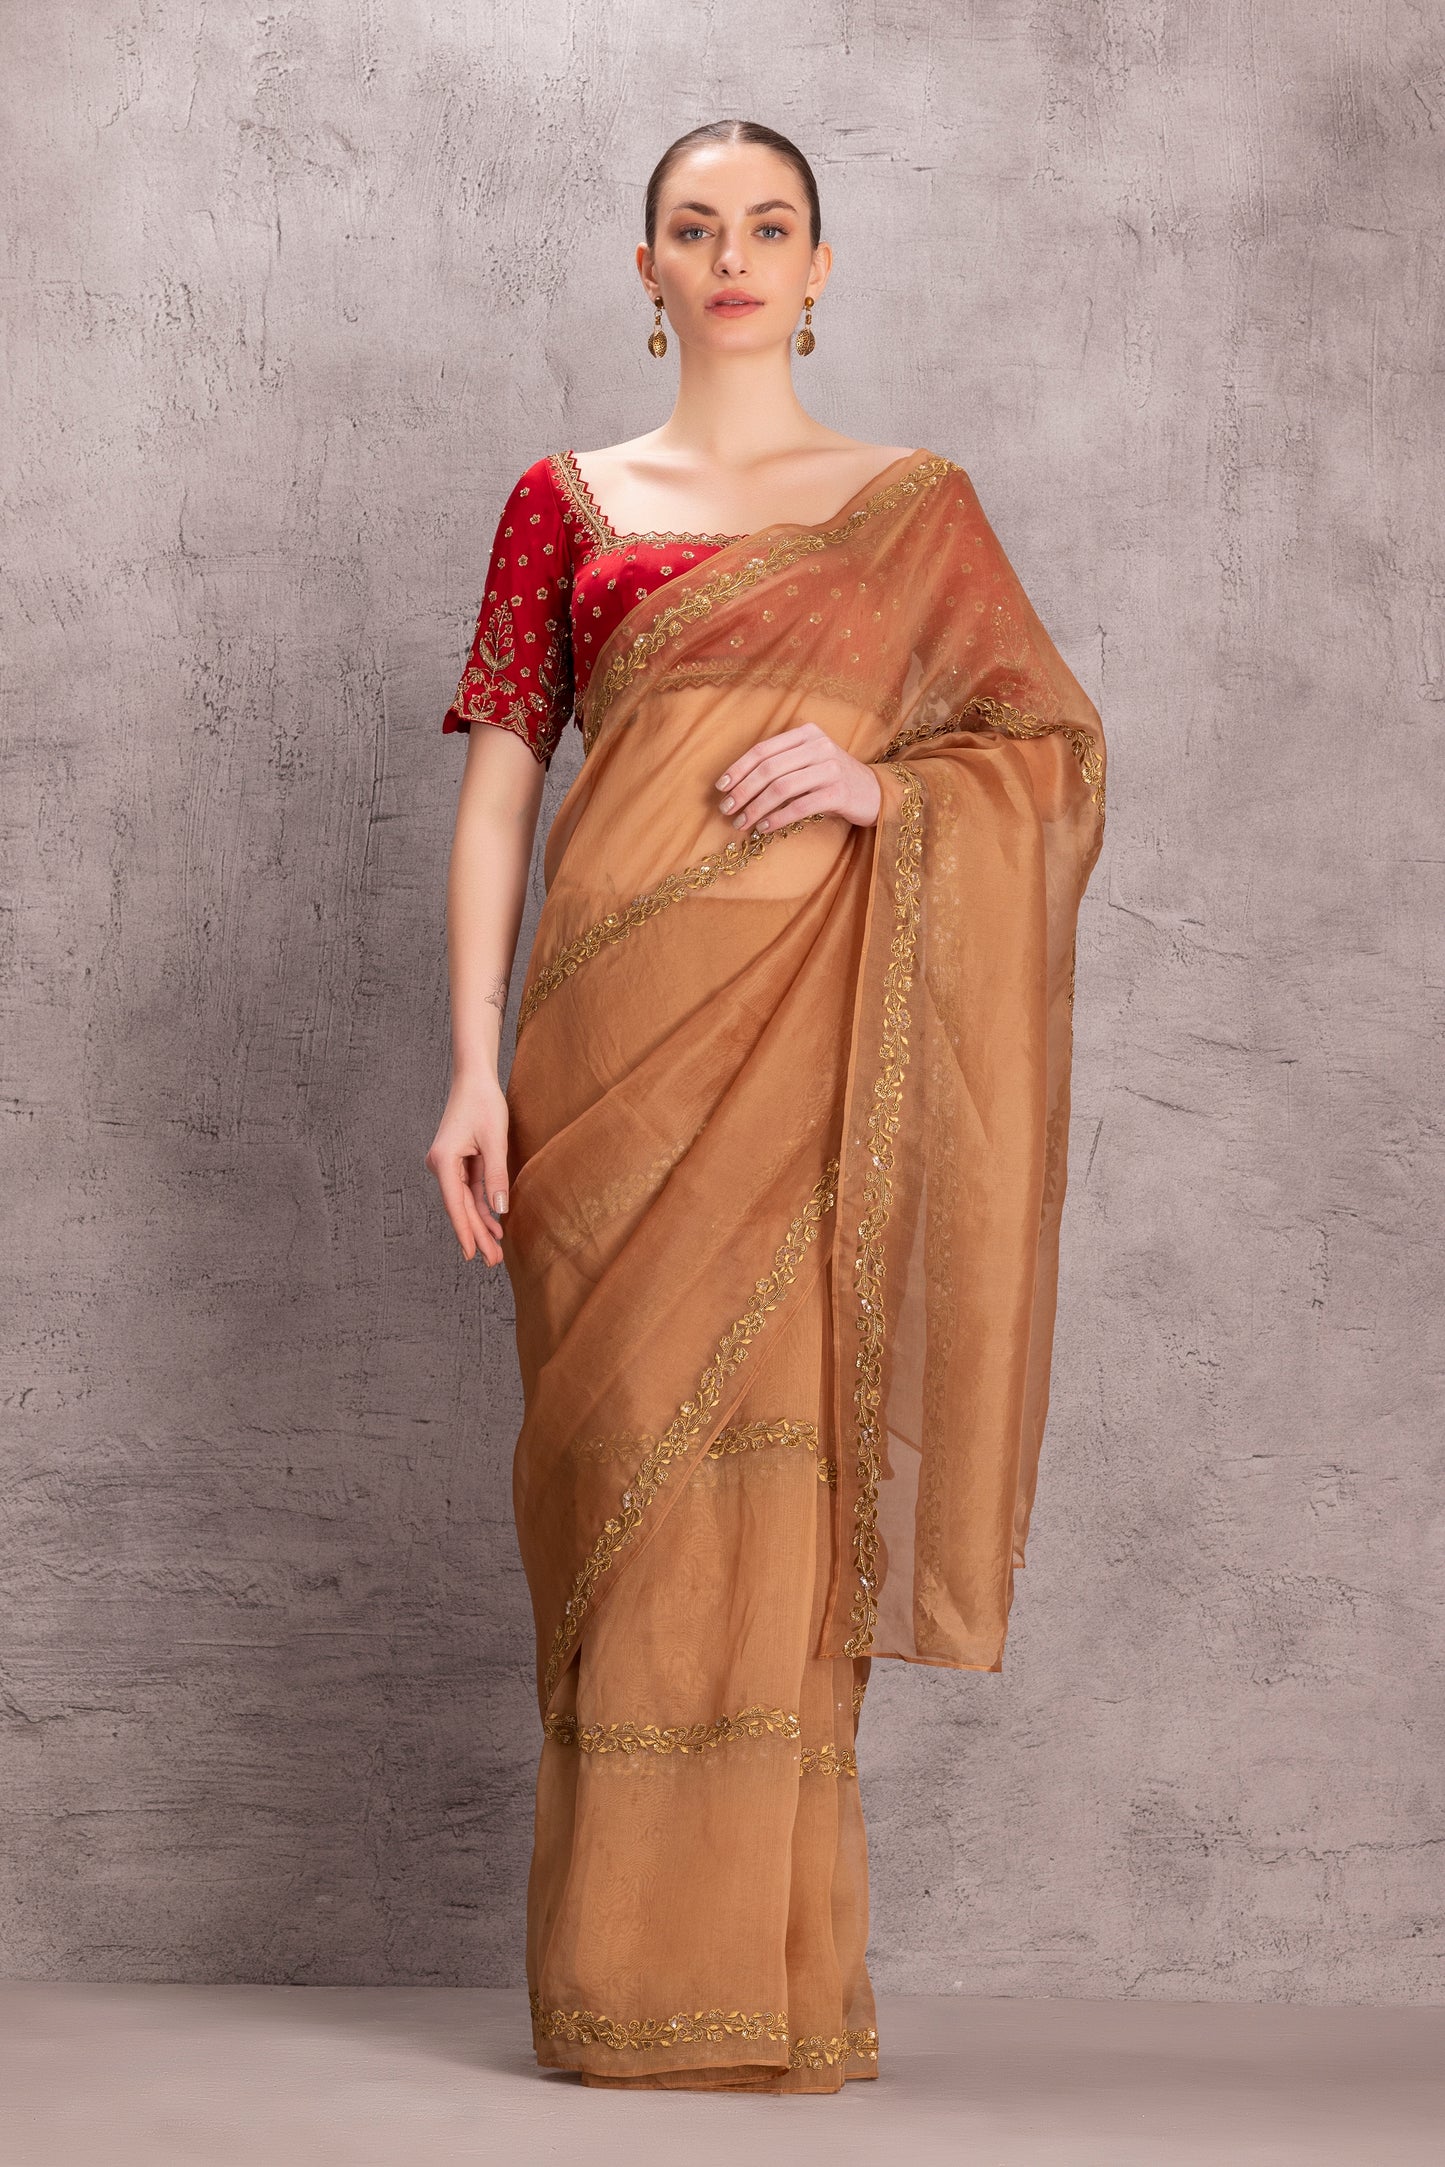 Golden Organza Saree comes With Satin Stitched Blouse & Organic Cotton Stitched Petticoat (3Pcs)